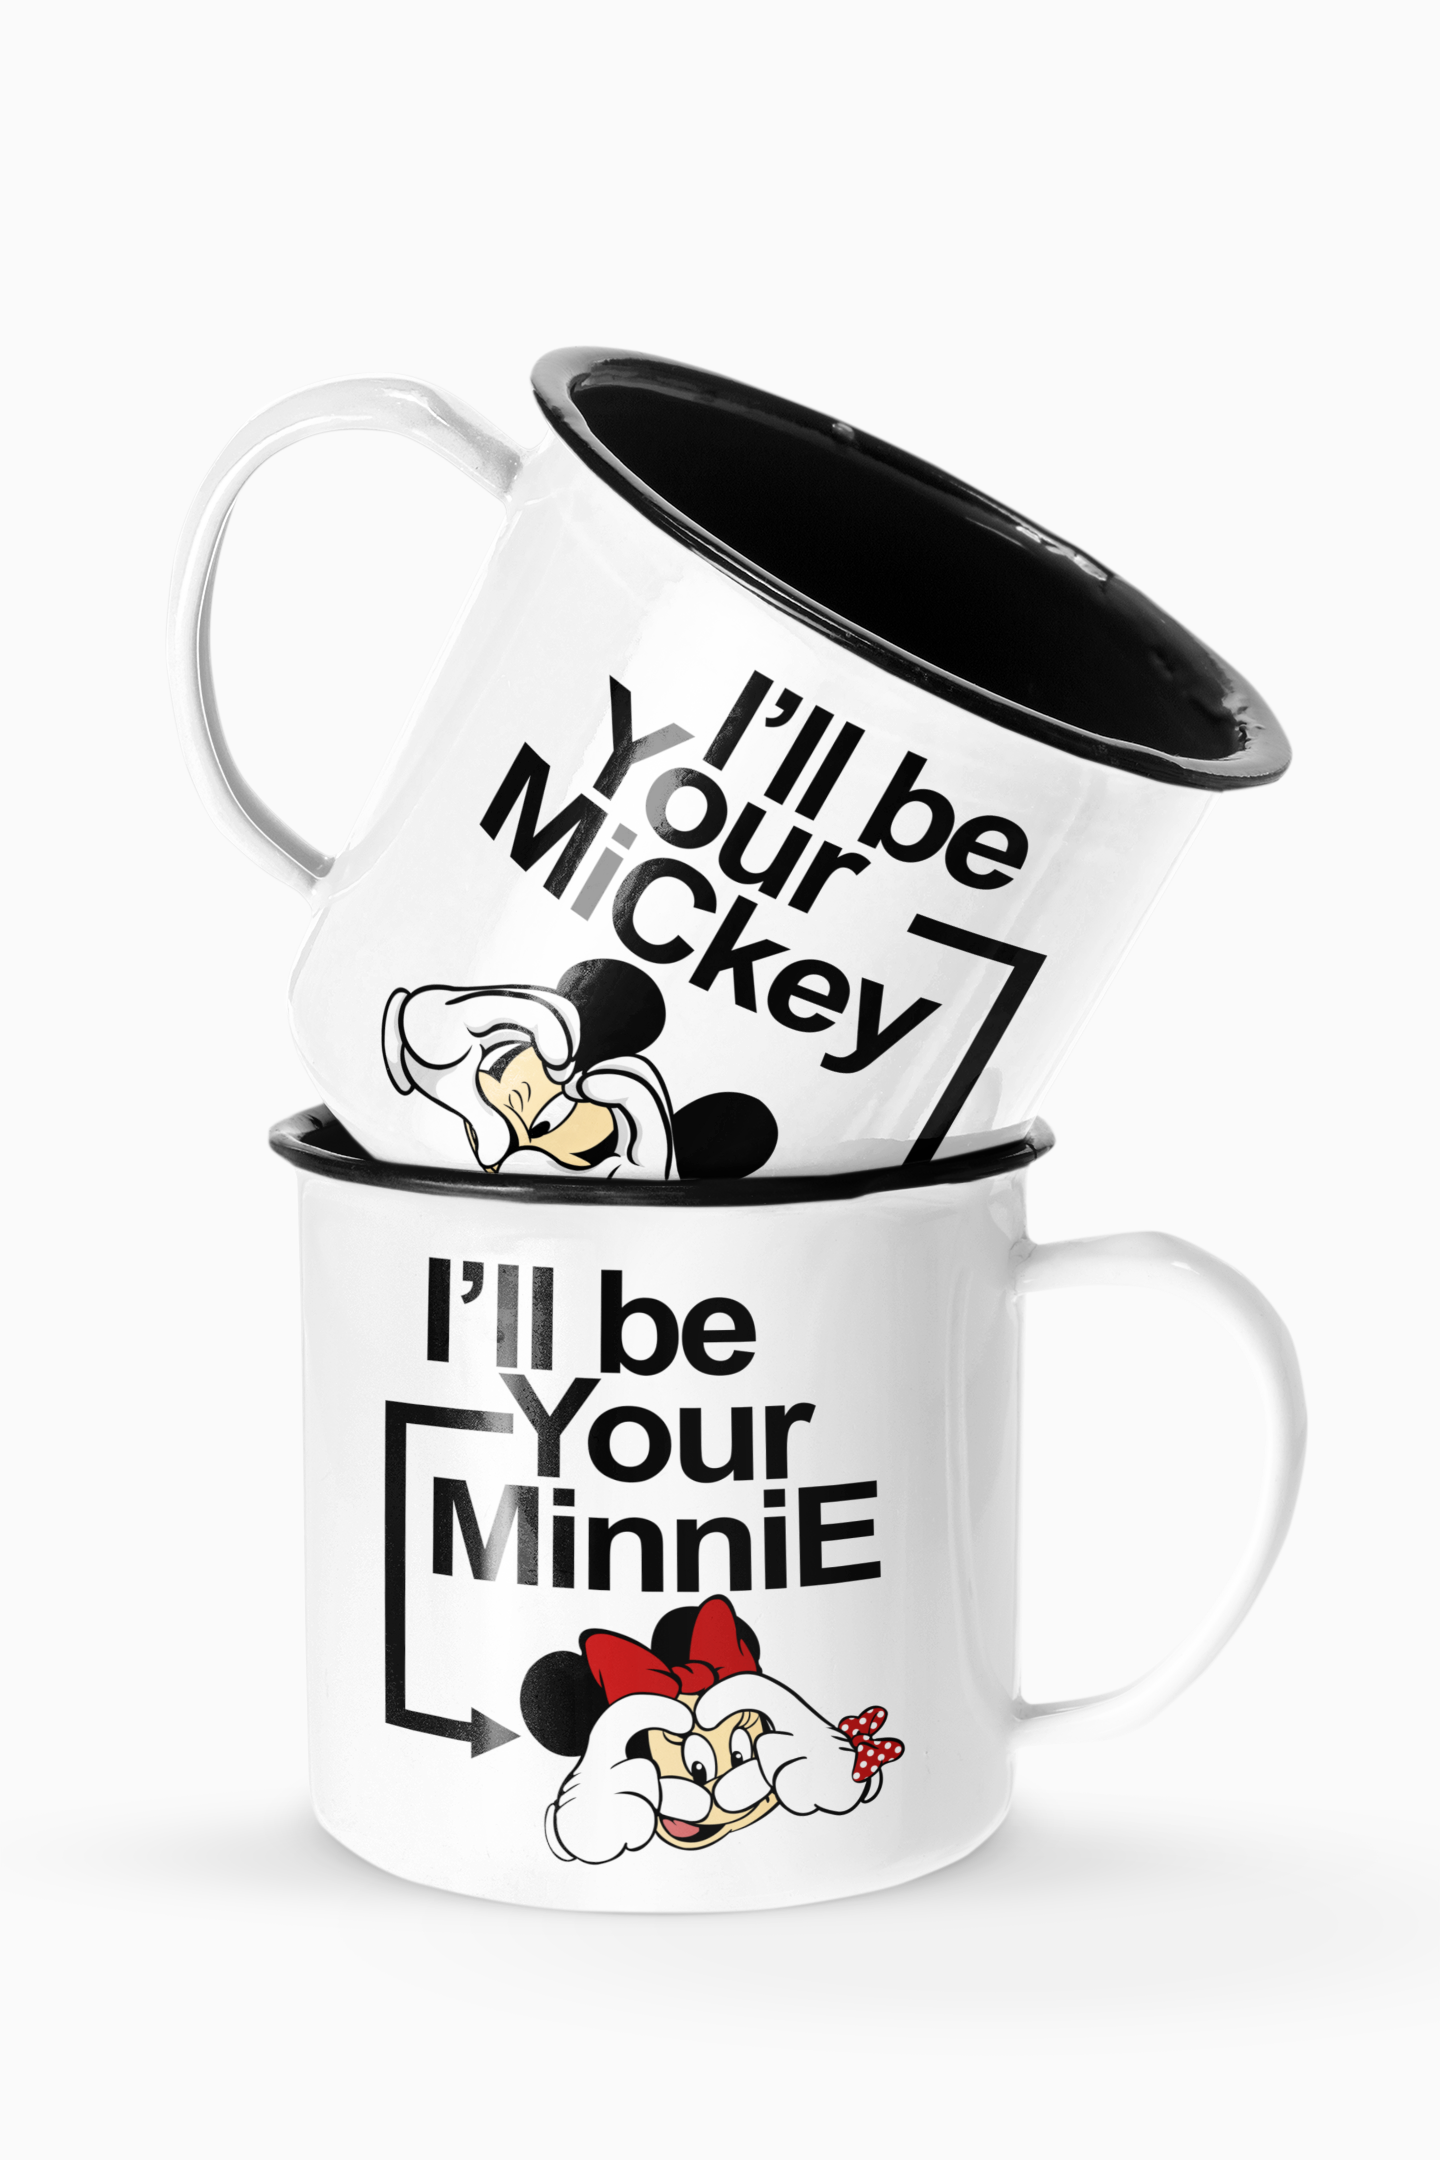 Will be Your Mickey and Minnie Couples Enamel Camp Cup Set Wedding Enamel Couples Gift